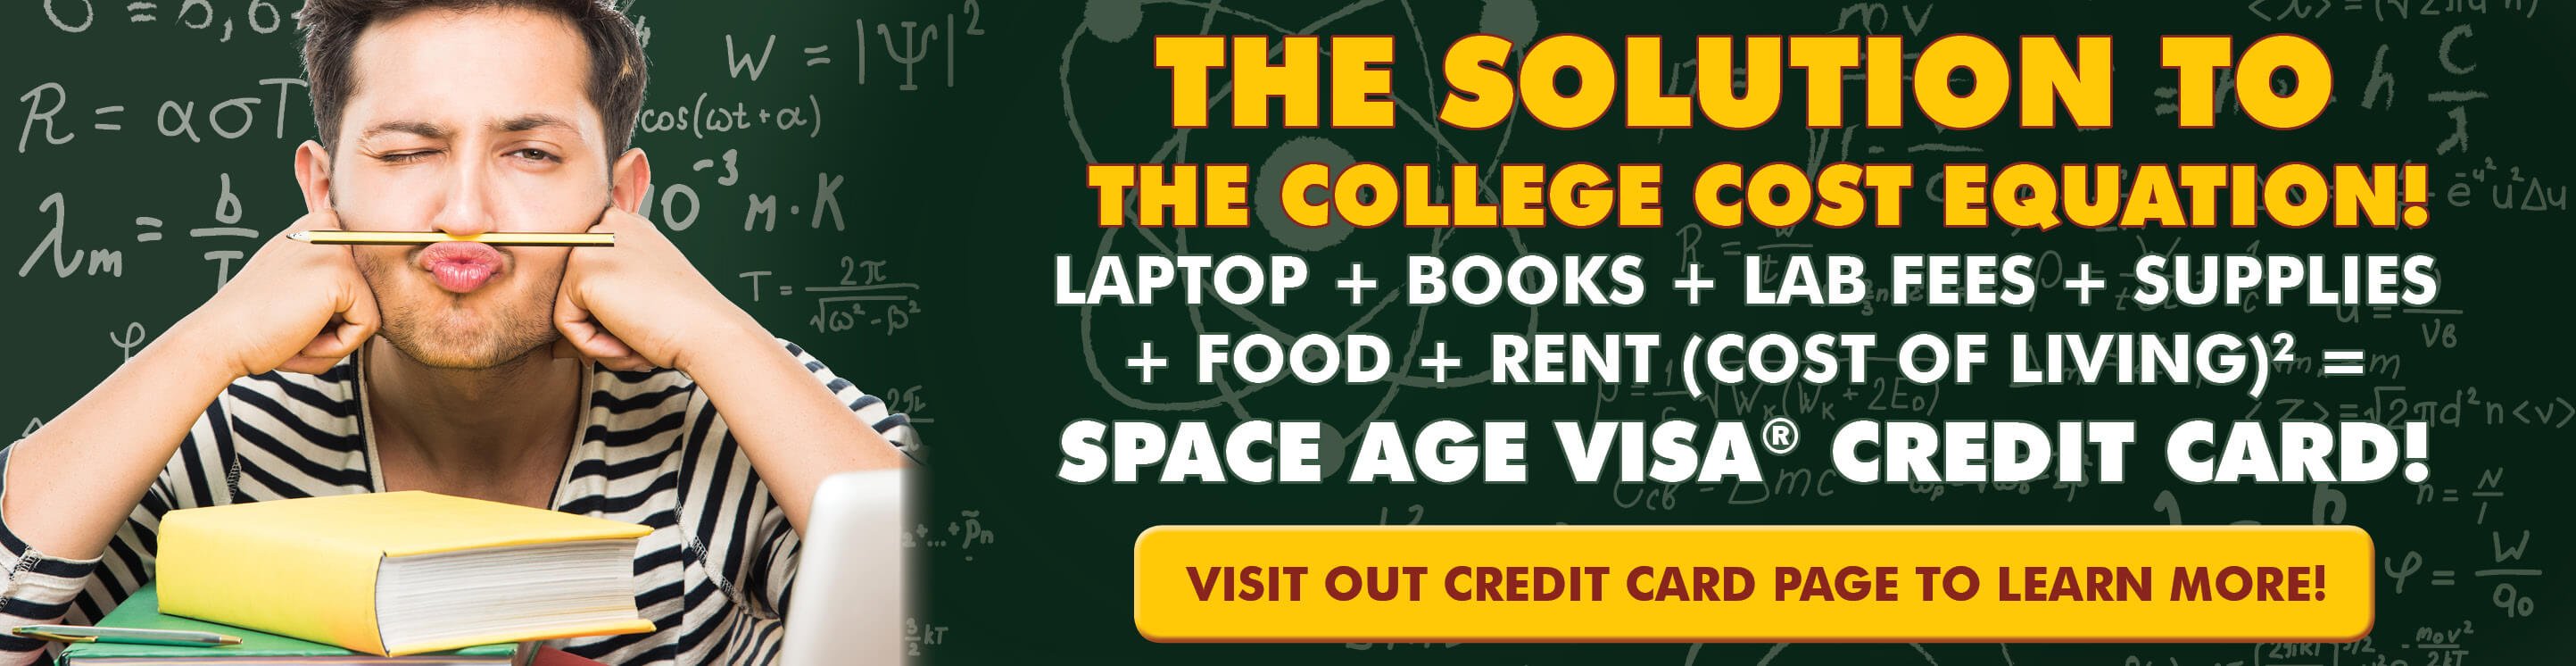 Solve the College Expenses Equation with a Space Age VISA Credit Card